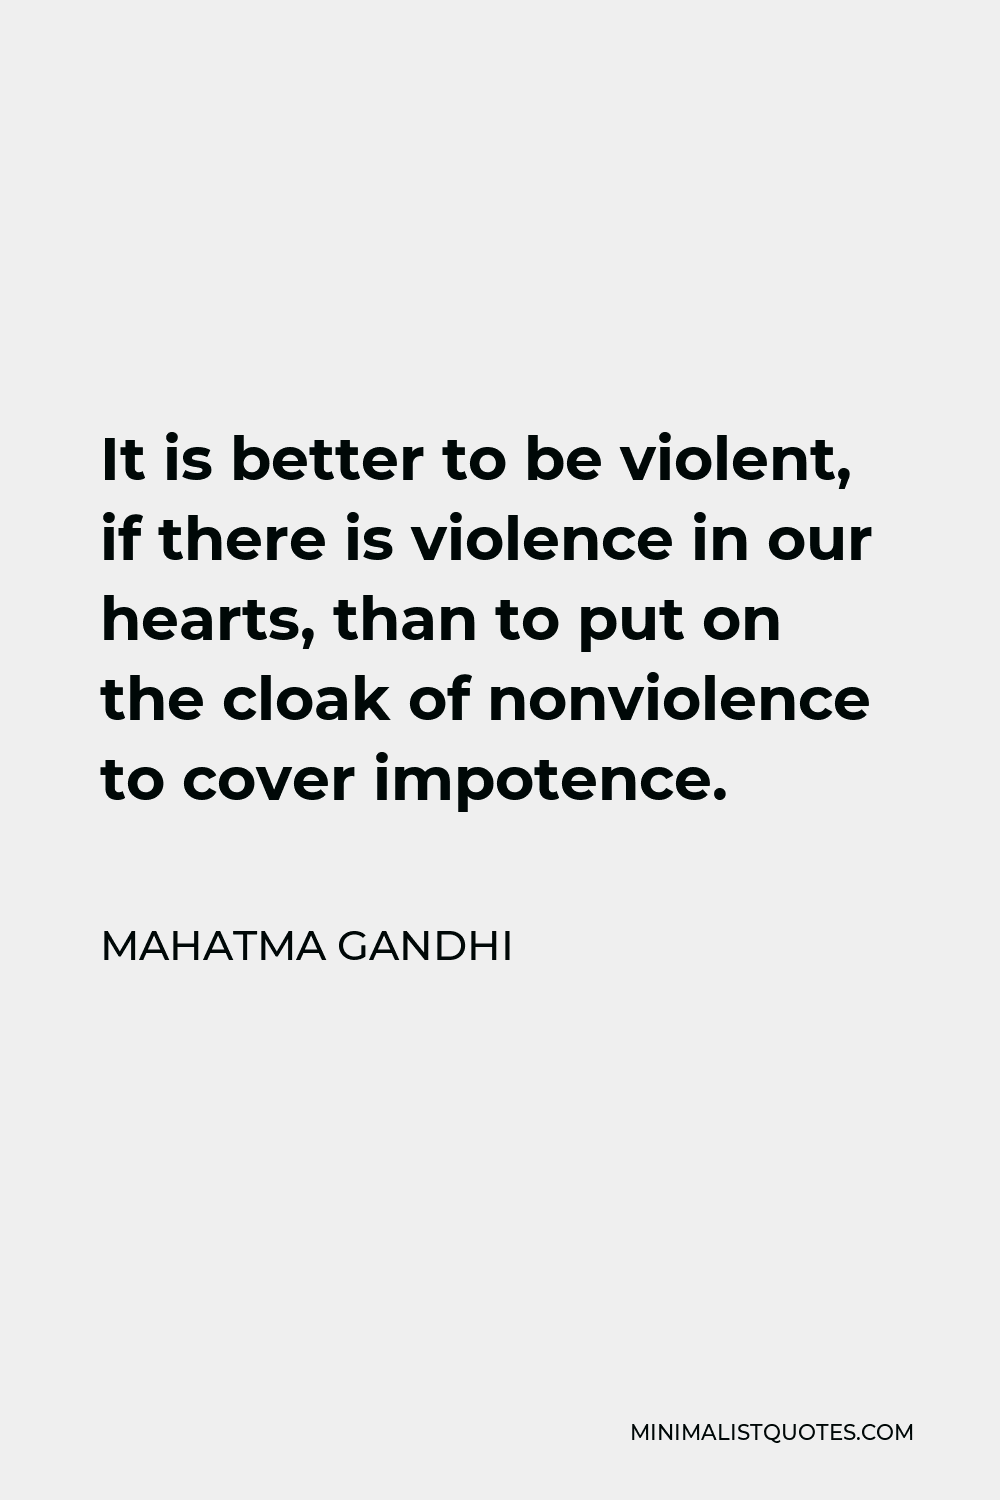 Mahatma Gandhi Quote - It is better to be violent, if there is violence in our hearts, than to put on the cloak of nonviolence to cover impotence.